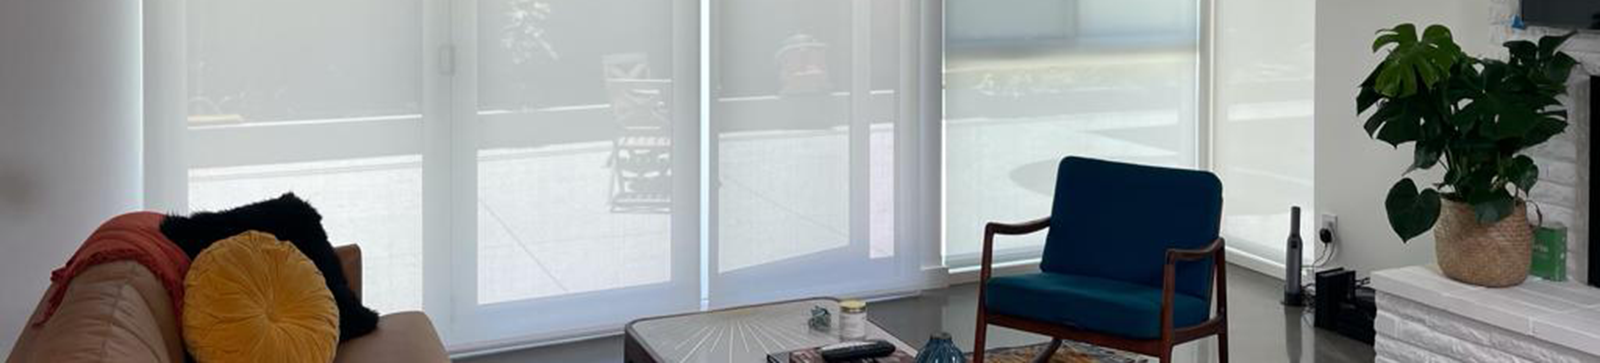 Motorized Shades for Glass Doors in Los Angeles